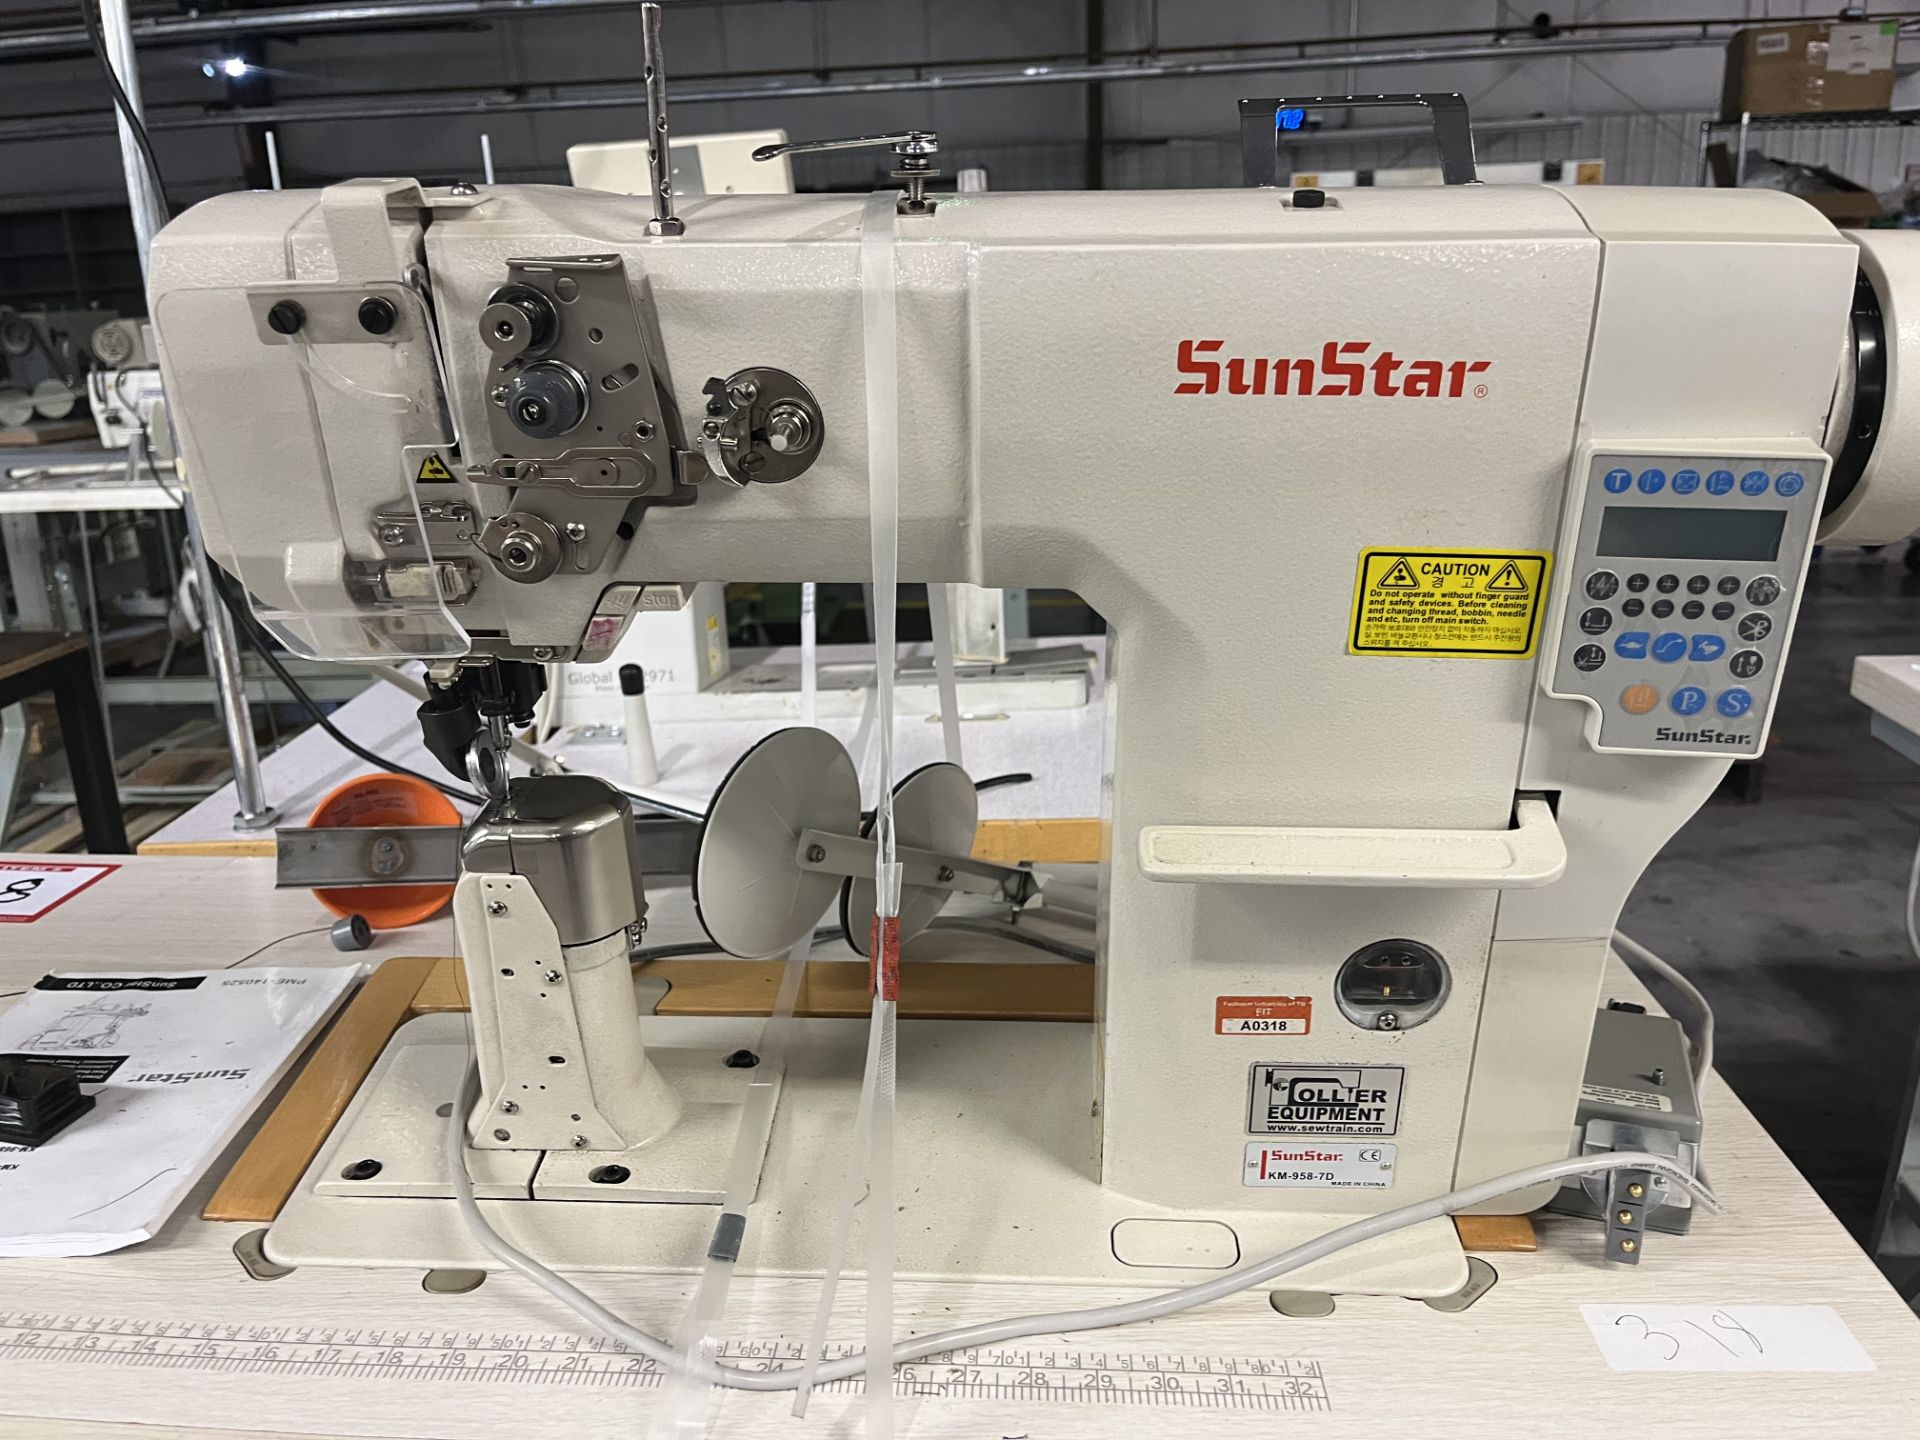 SunStar model KM-958-7D Single Needle Sewing Machine S/N #17JJ0302, Weight = 225 lbs, with - Image 4 of 6